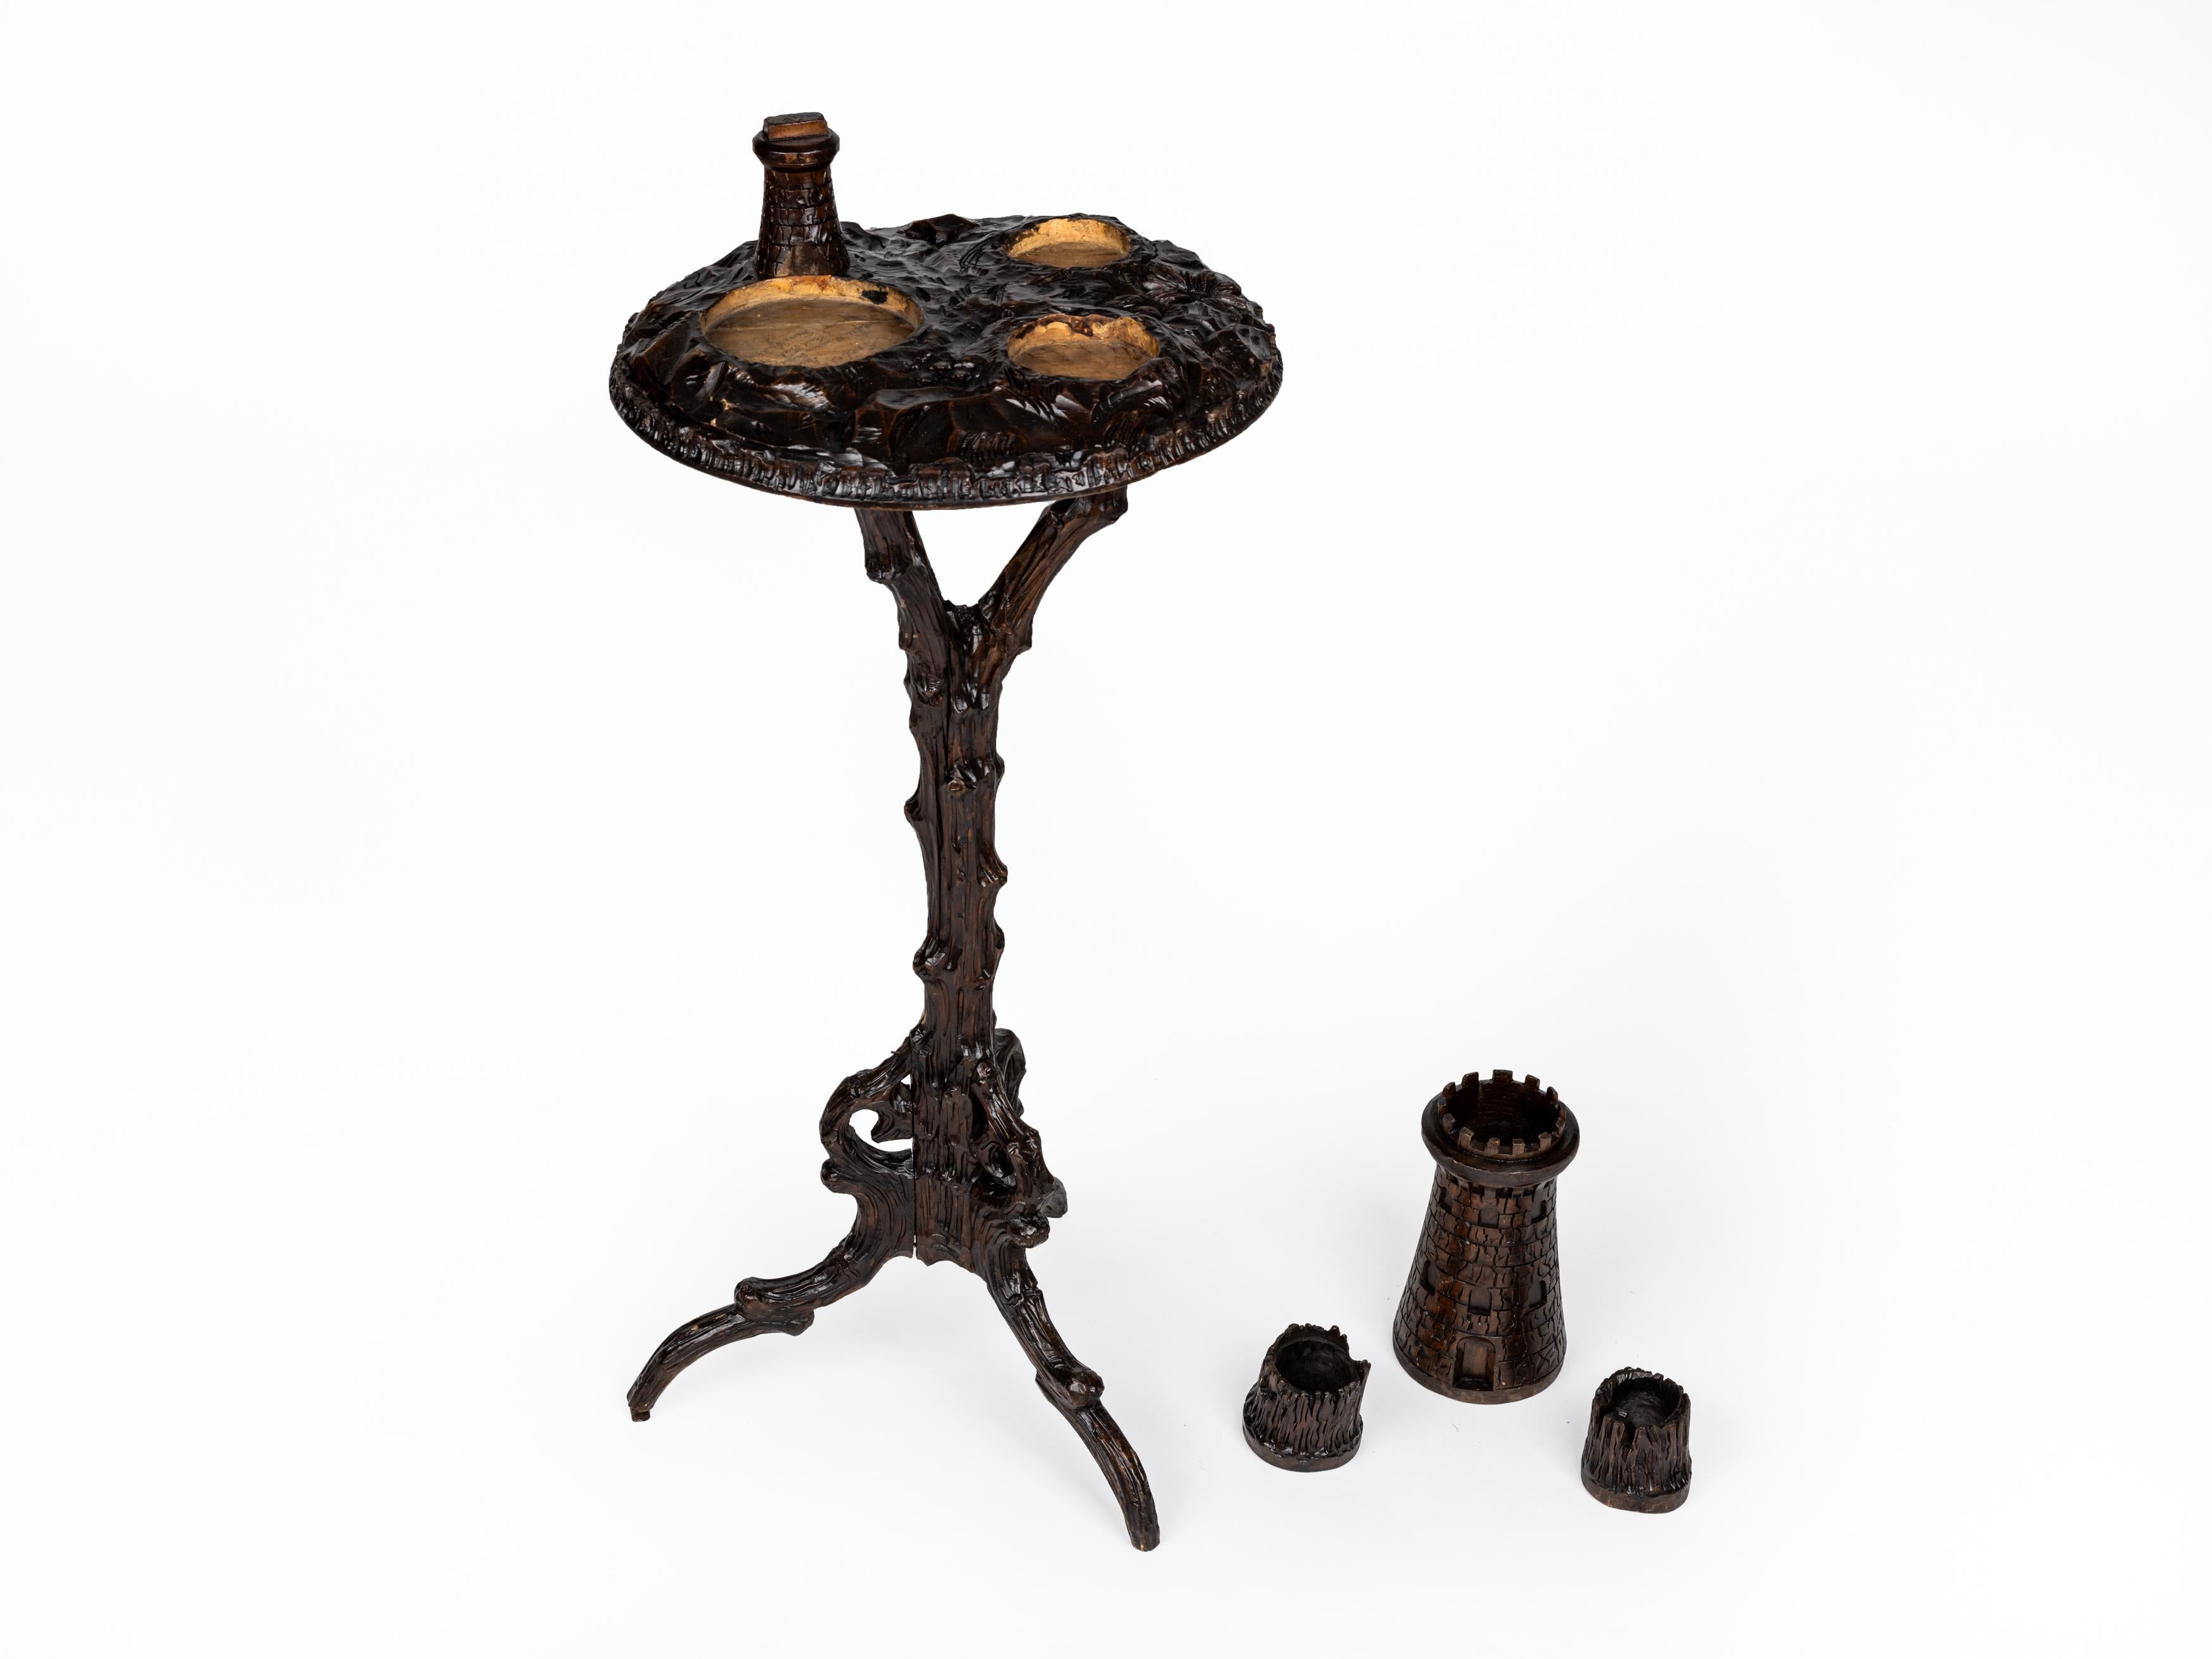 Fascinating smoking table with detachable accessories, made in Bavaria or Austria at the end of the 19th century.

The ingenious design features a column - stylized as a branch growing out of curving roots - which form the triangular base.
The top